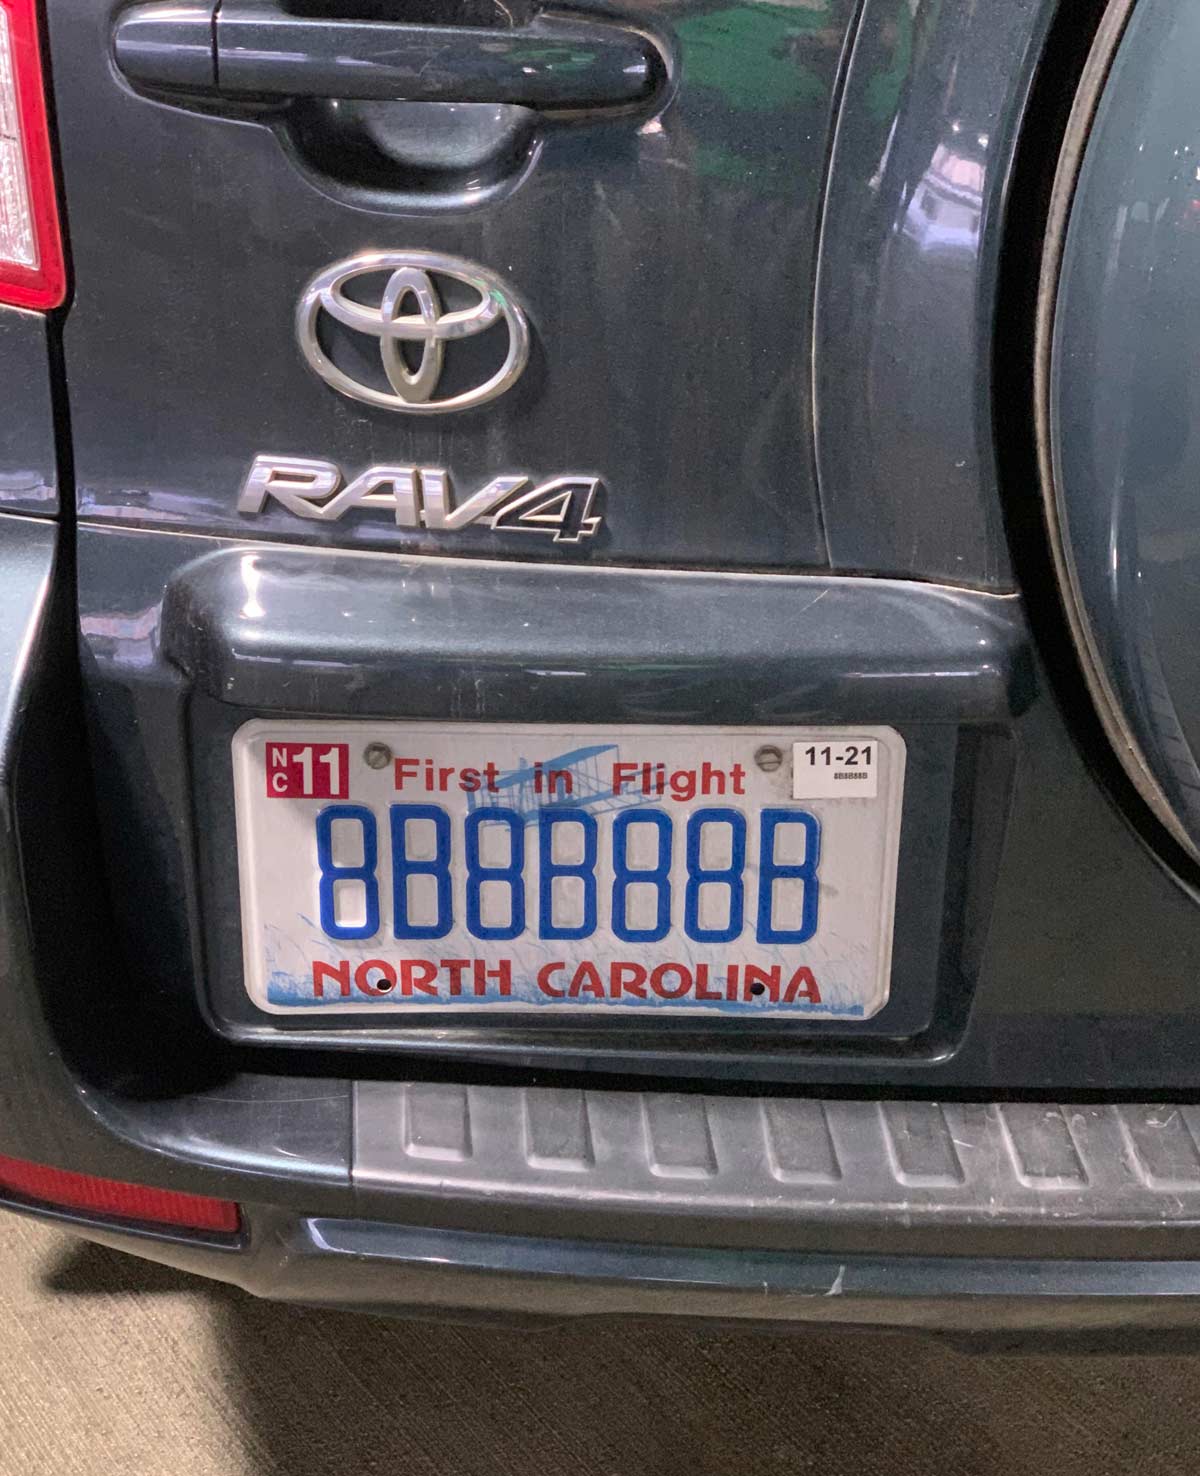 This license plate is all B's and 8's